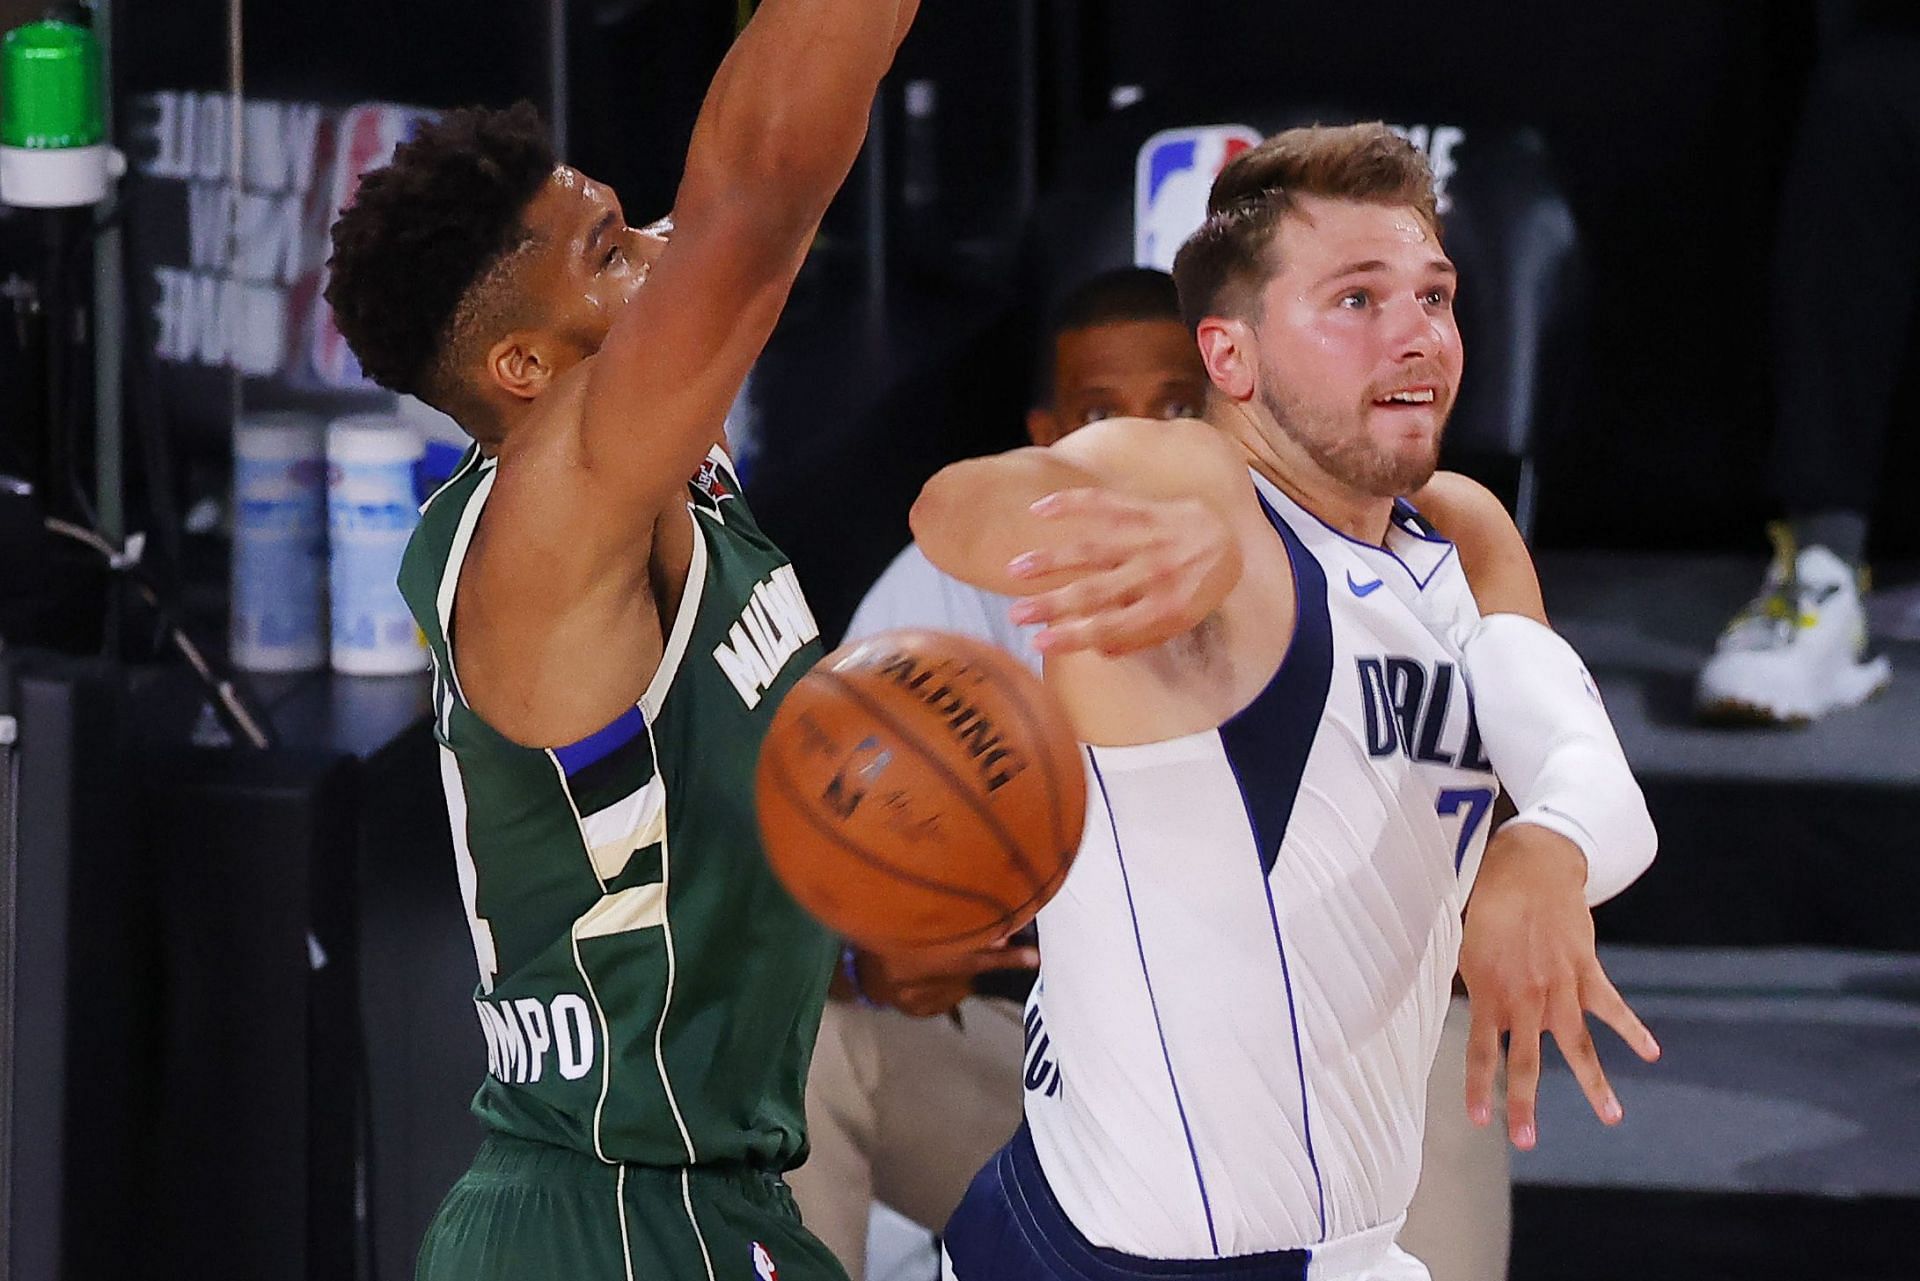 Giannis Antetokounmpo (left) and Luka Doncic could be the biggest rivalry in the next 10 years, according to Nick Wright. [Photo: Bleacher Report]